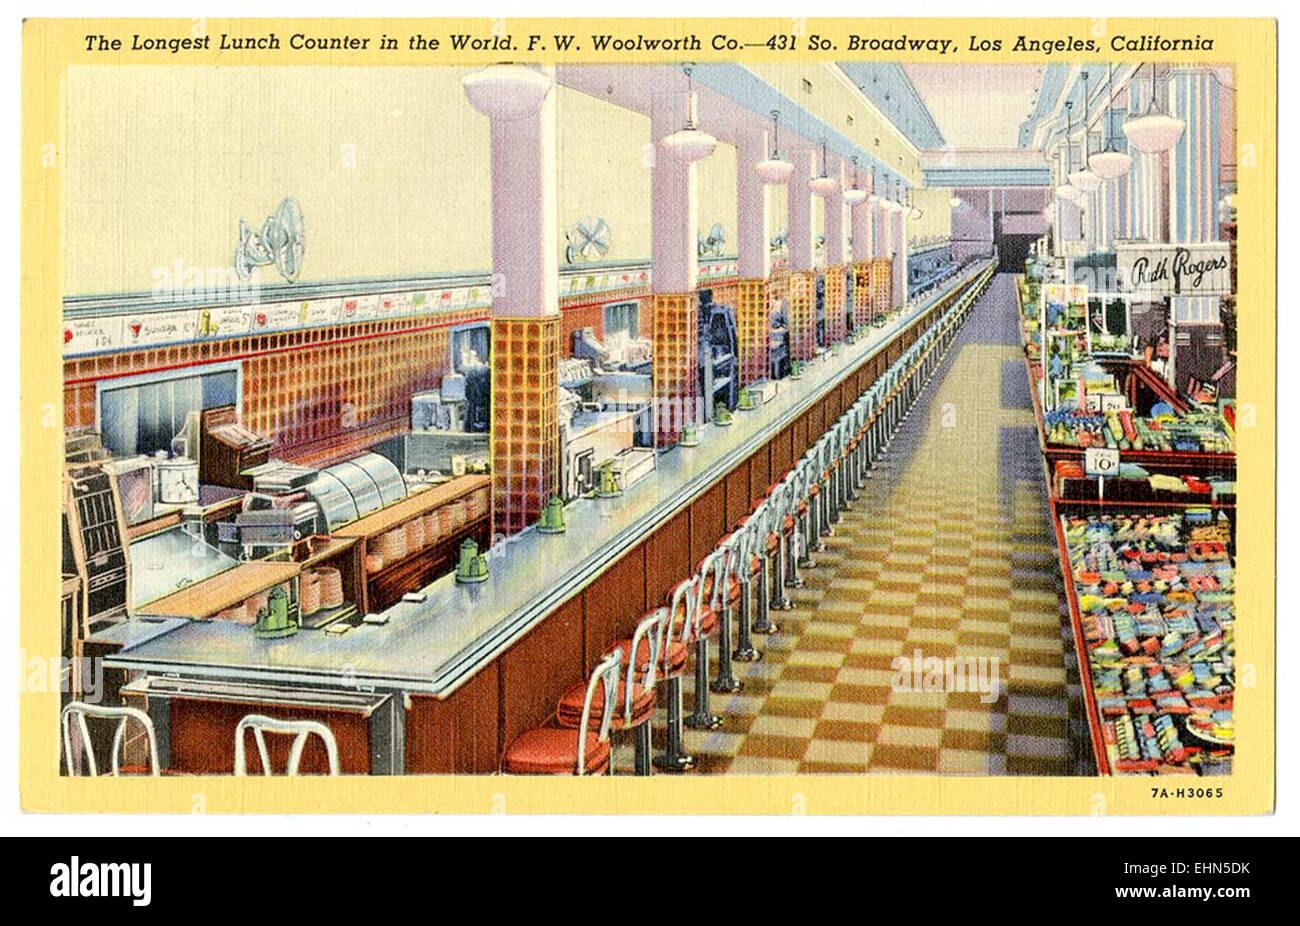 F W Woolworth Stock Photos & F W Woolworth Stock Images - Alamy1300 x 926